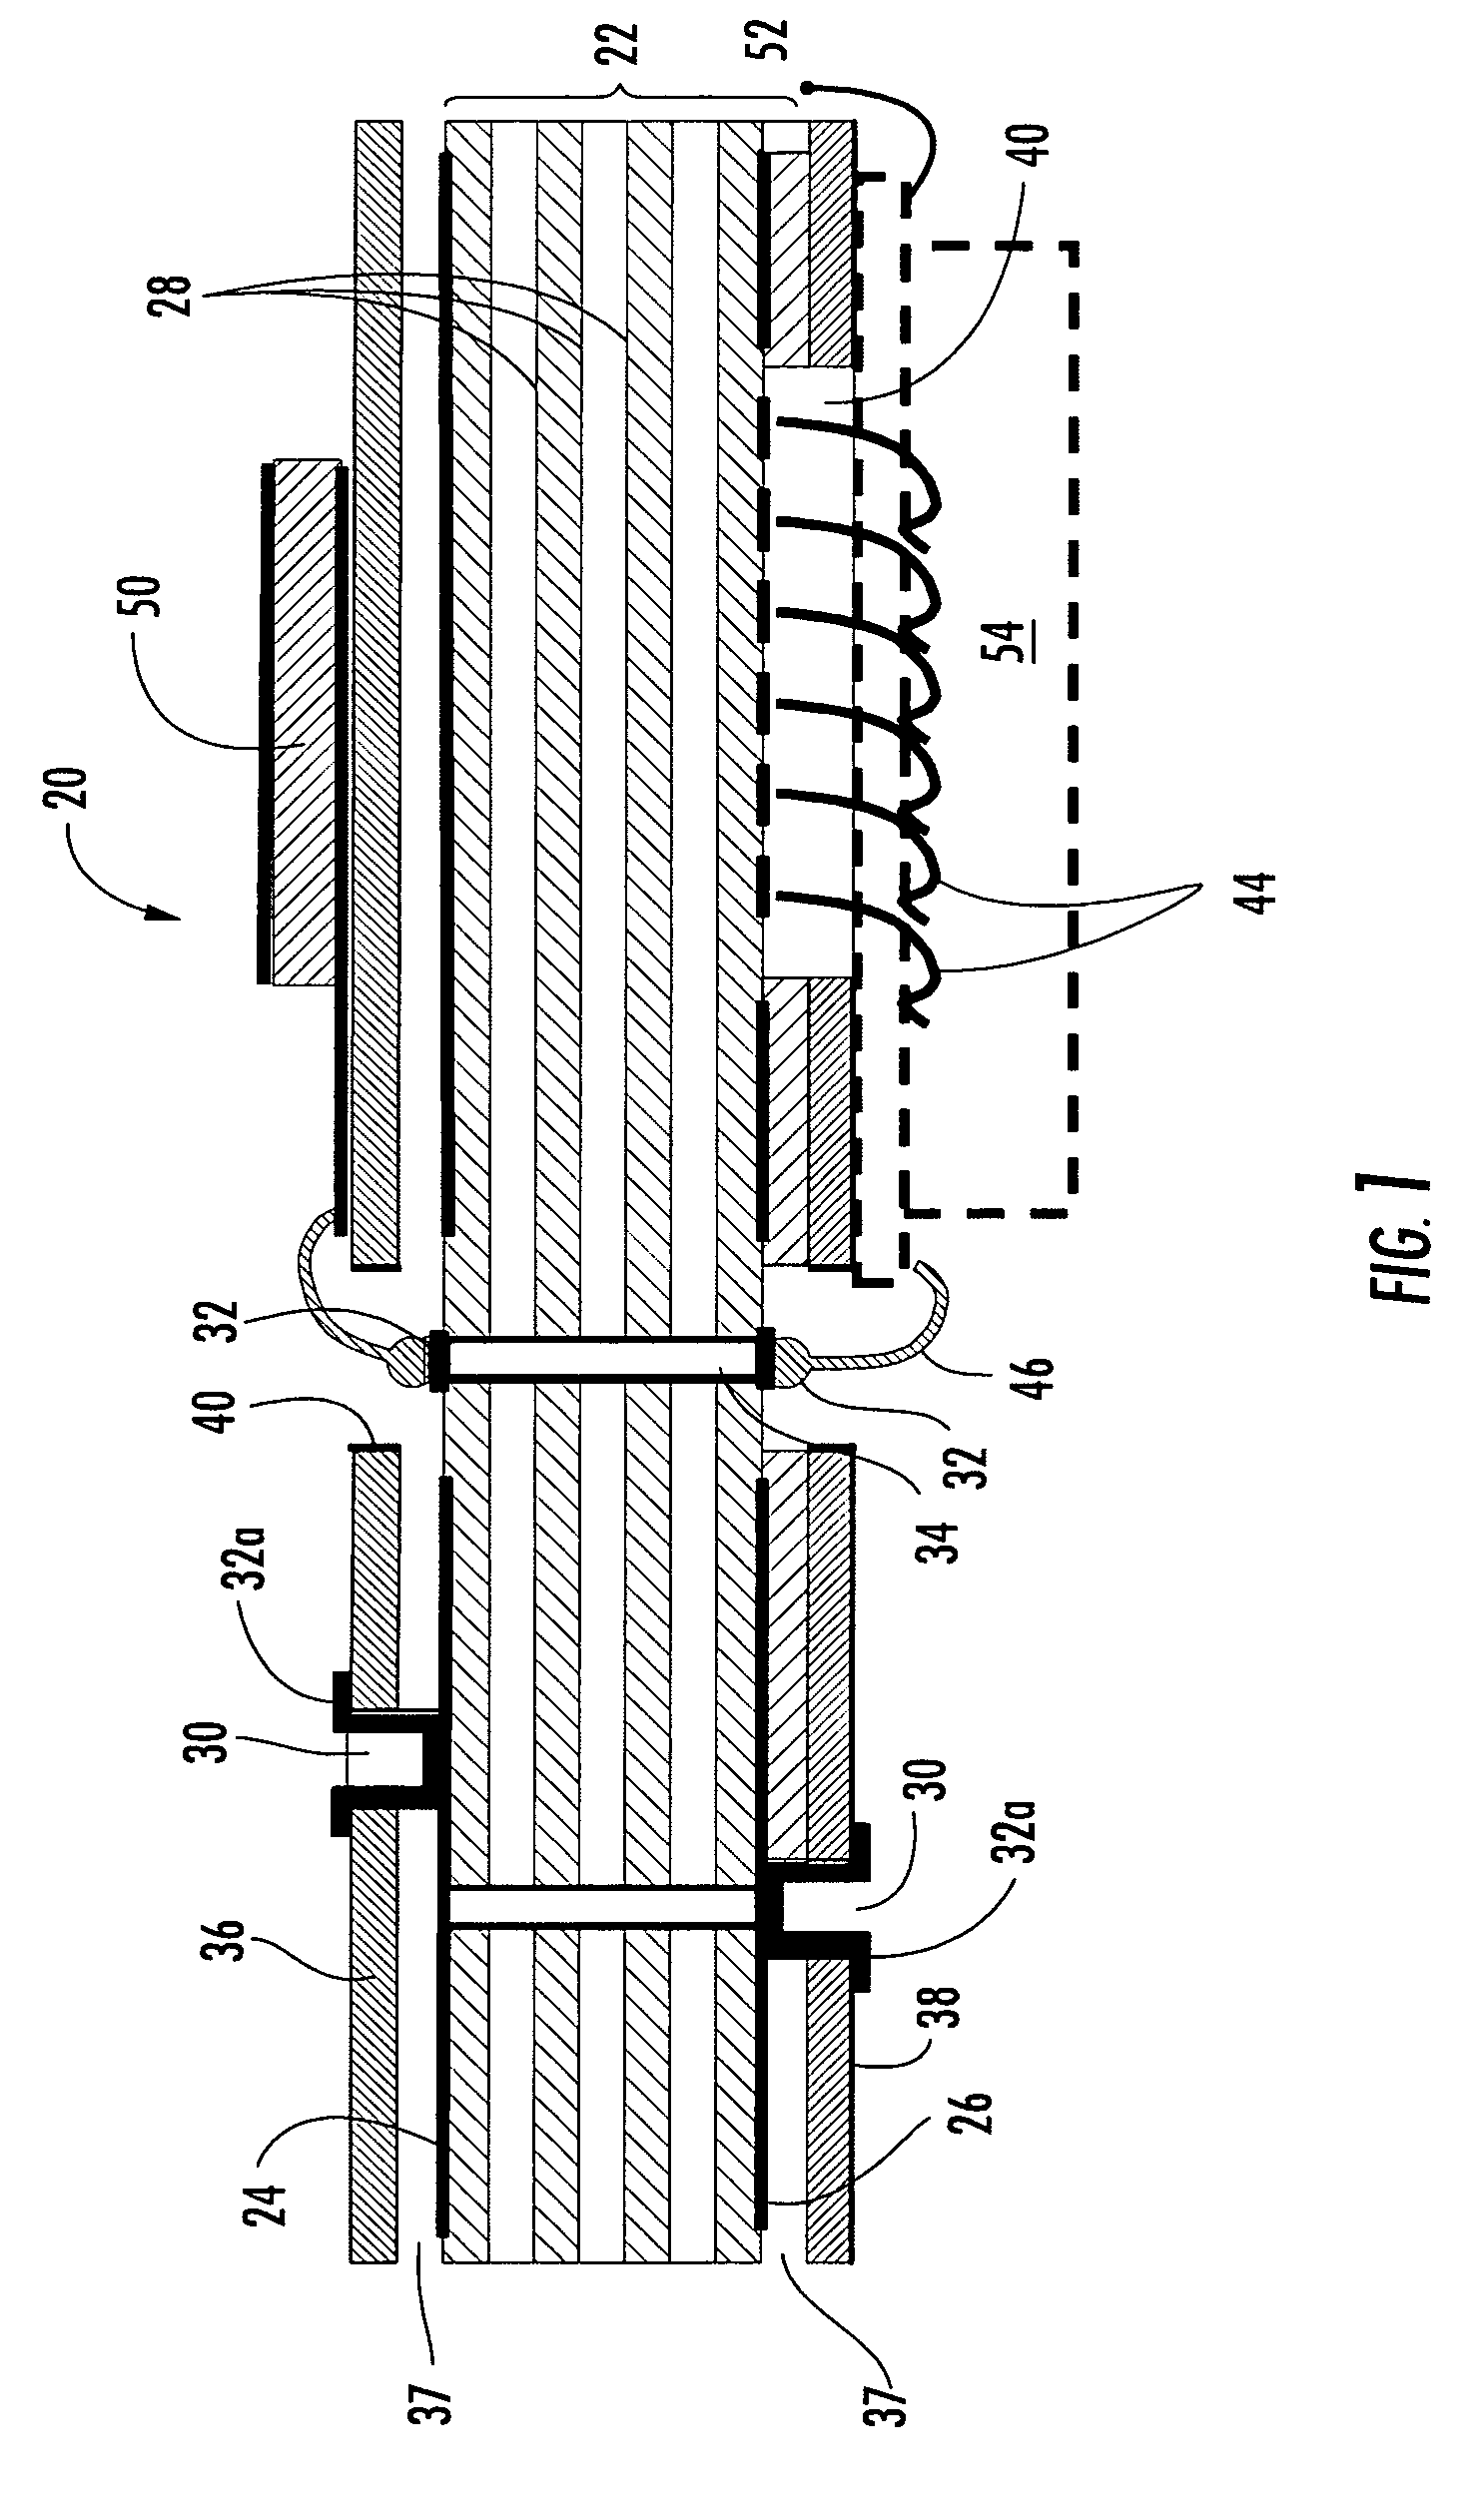 Printed wiring board with enhanced structural integrity